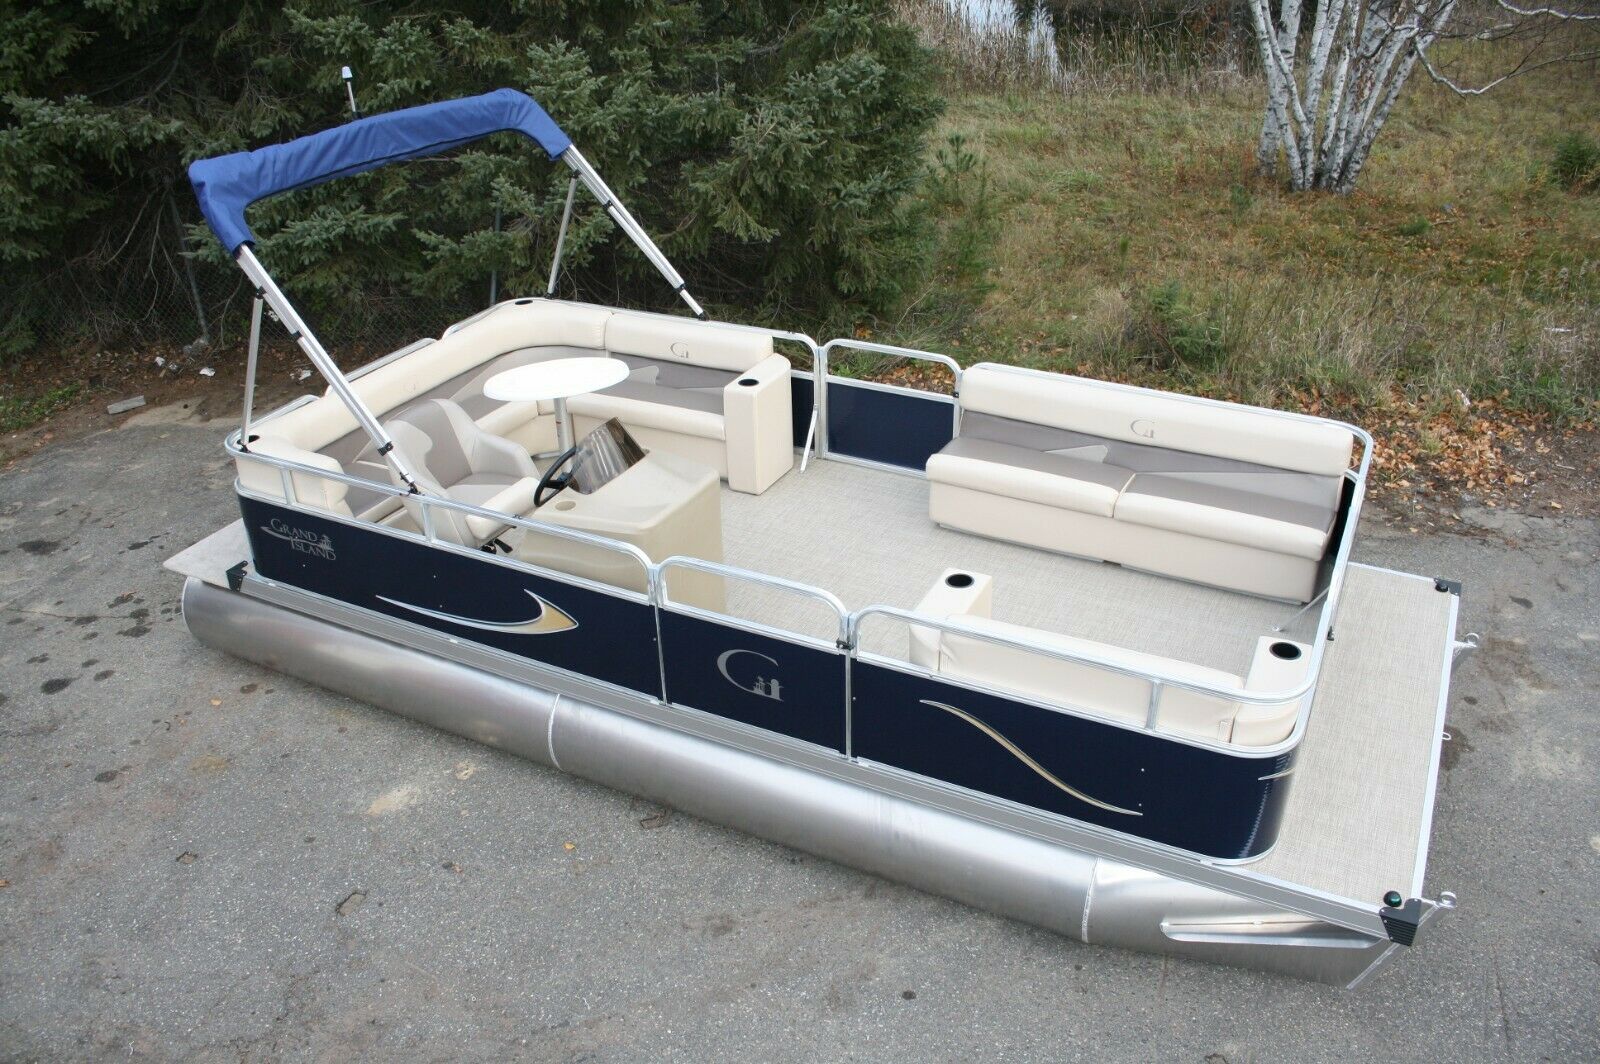 New 20 Ft Pontoon Boat With 40 Hp Motor And Trailer New 2021 For